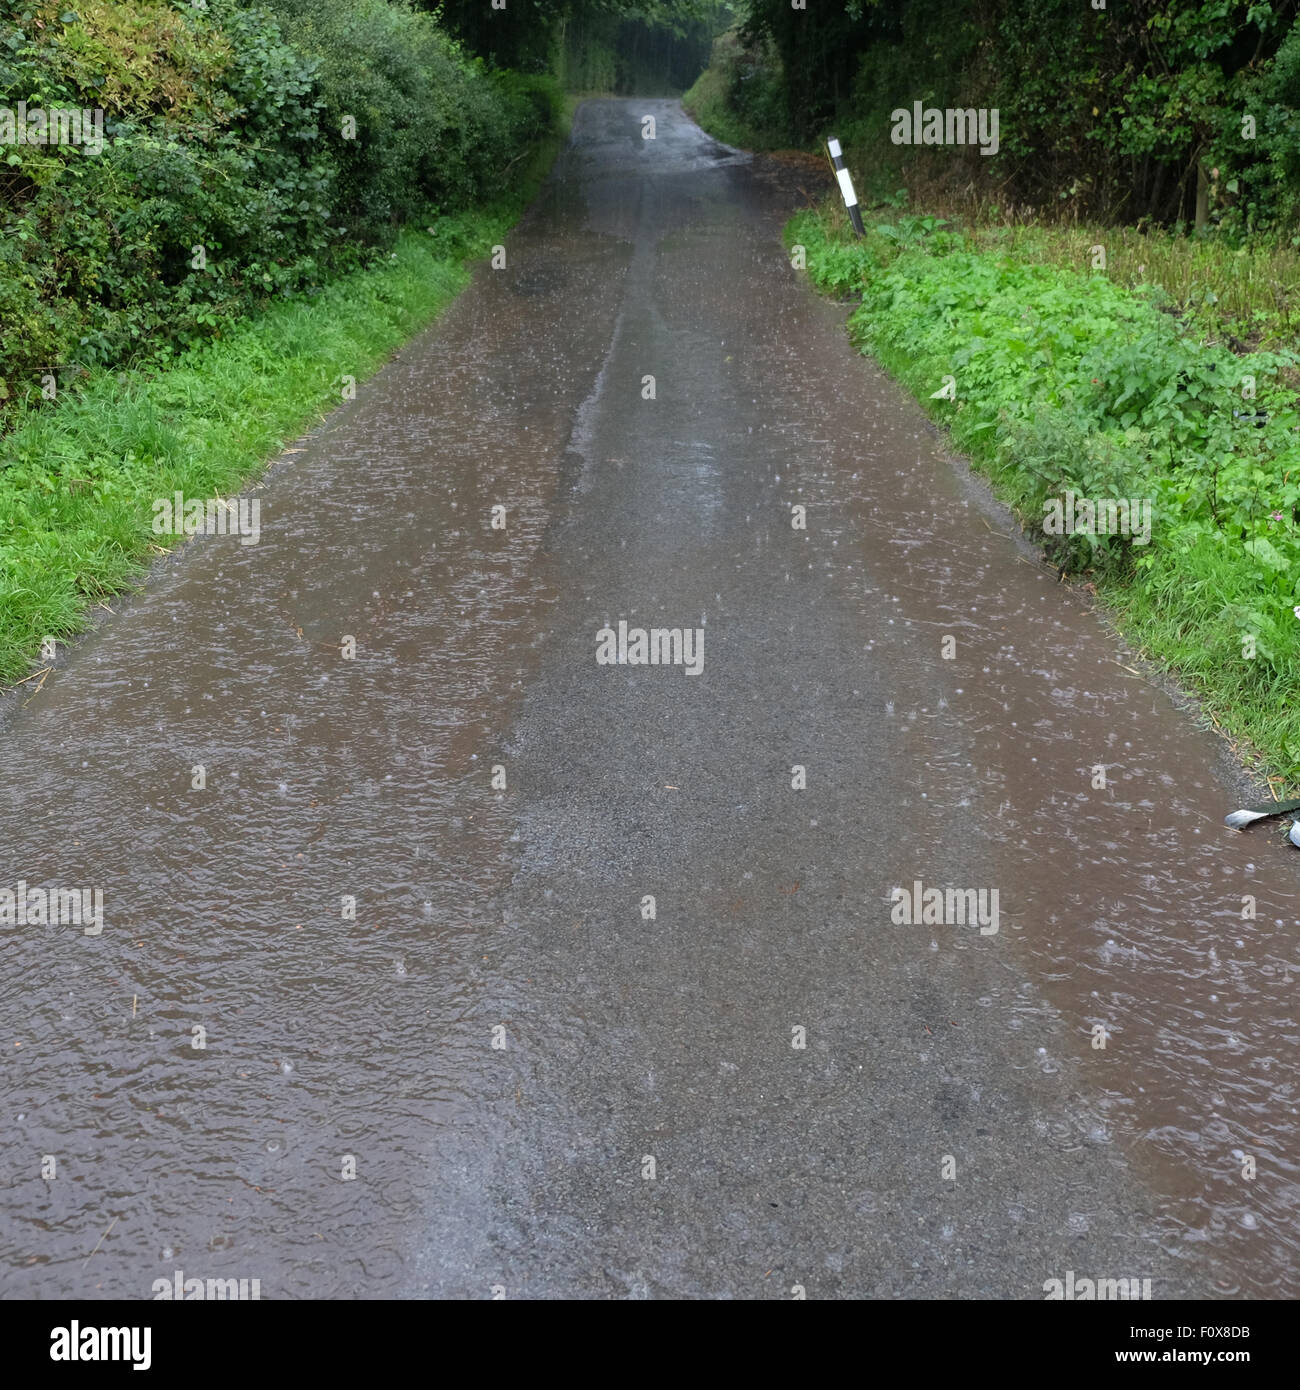 Herefordshire UK. 22nd August, 2015. After a day of very hot and humid weather a summer thunderstorm brought torrential rain down at Titley Herefordshire at 6.15pm causing flooding on many country lanes that lack drains. Stock Photo